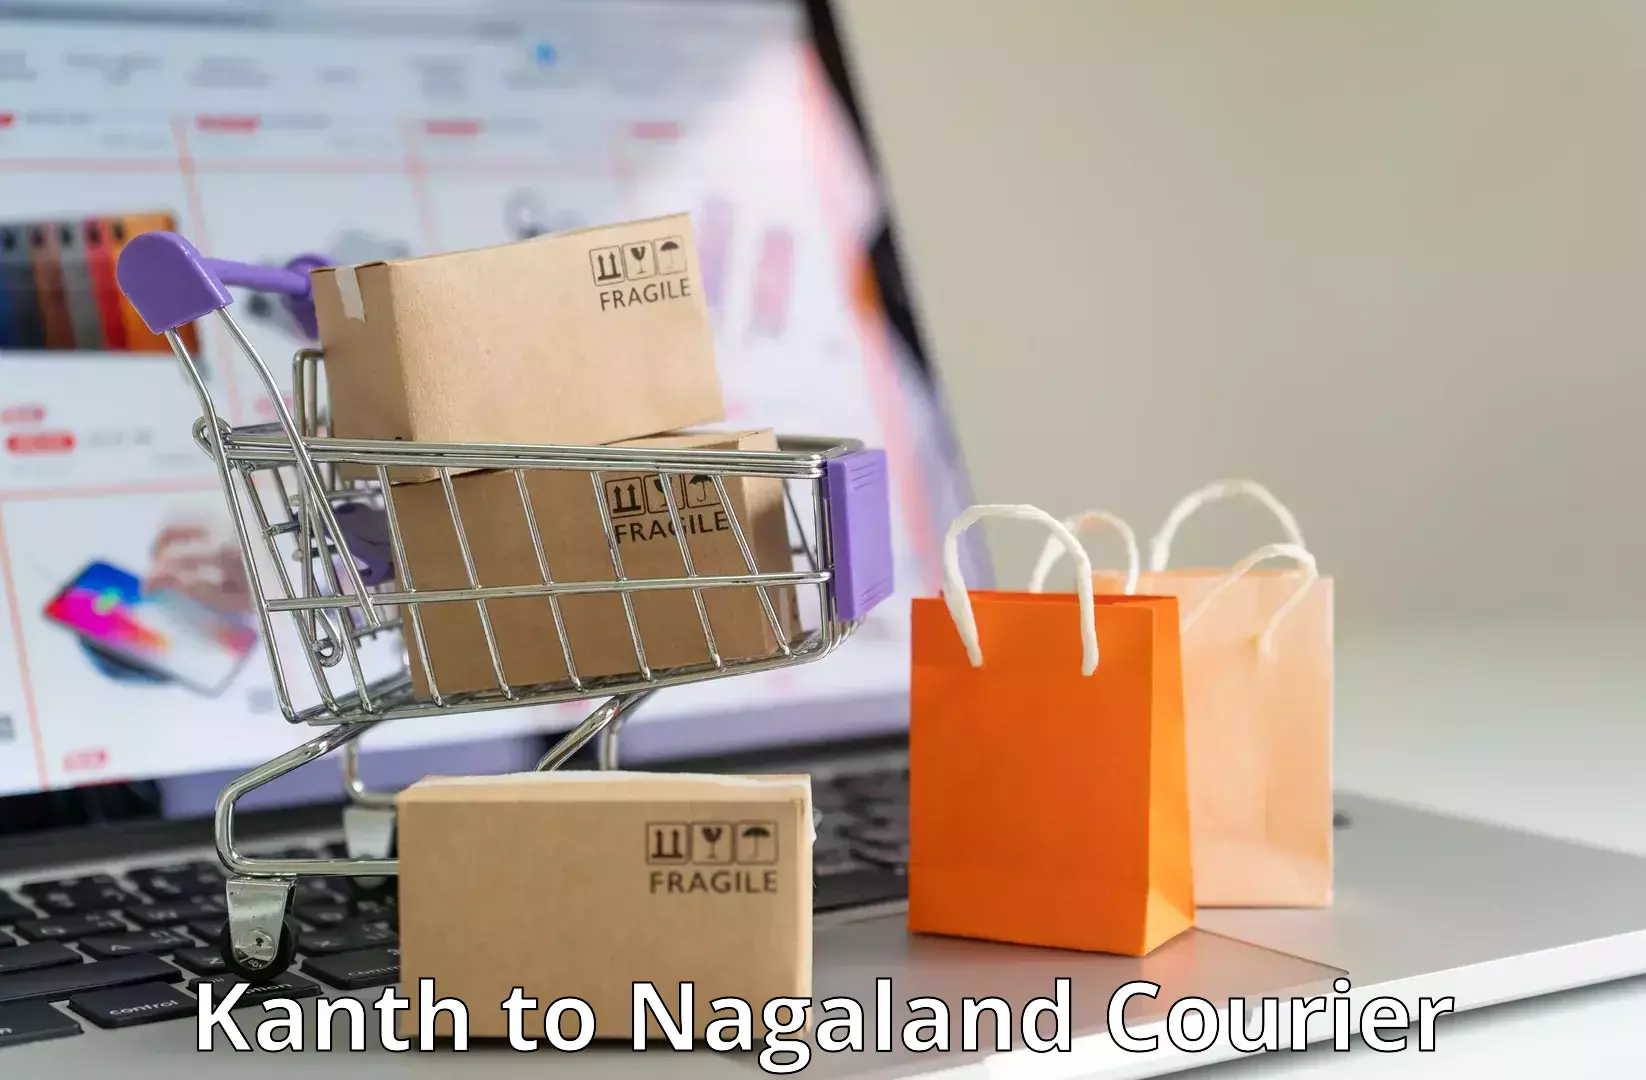 Express mail solutions Kanth to Nagaland